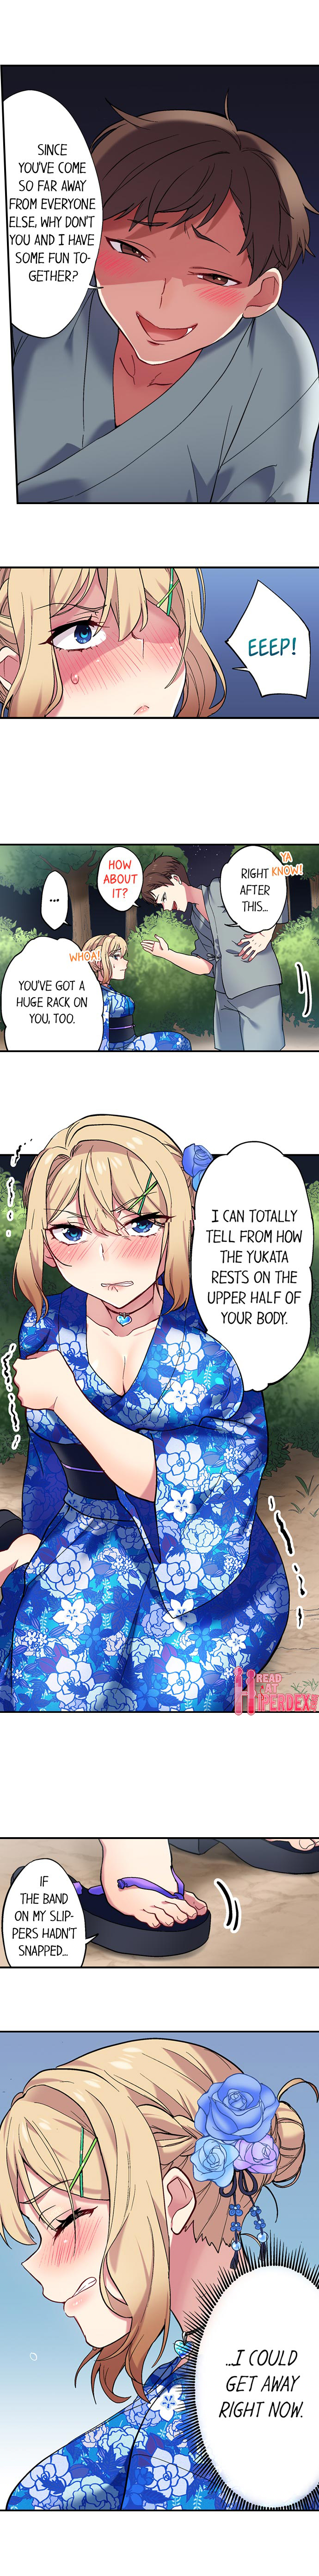 Committee Chairman, Didn’t You Just Masturbate In the Bathroom? I Can See the Number of Times People Orgasm - Chapter 88 Page 5